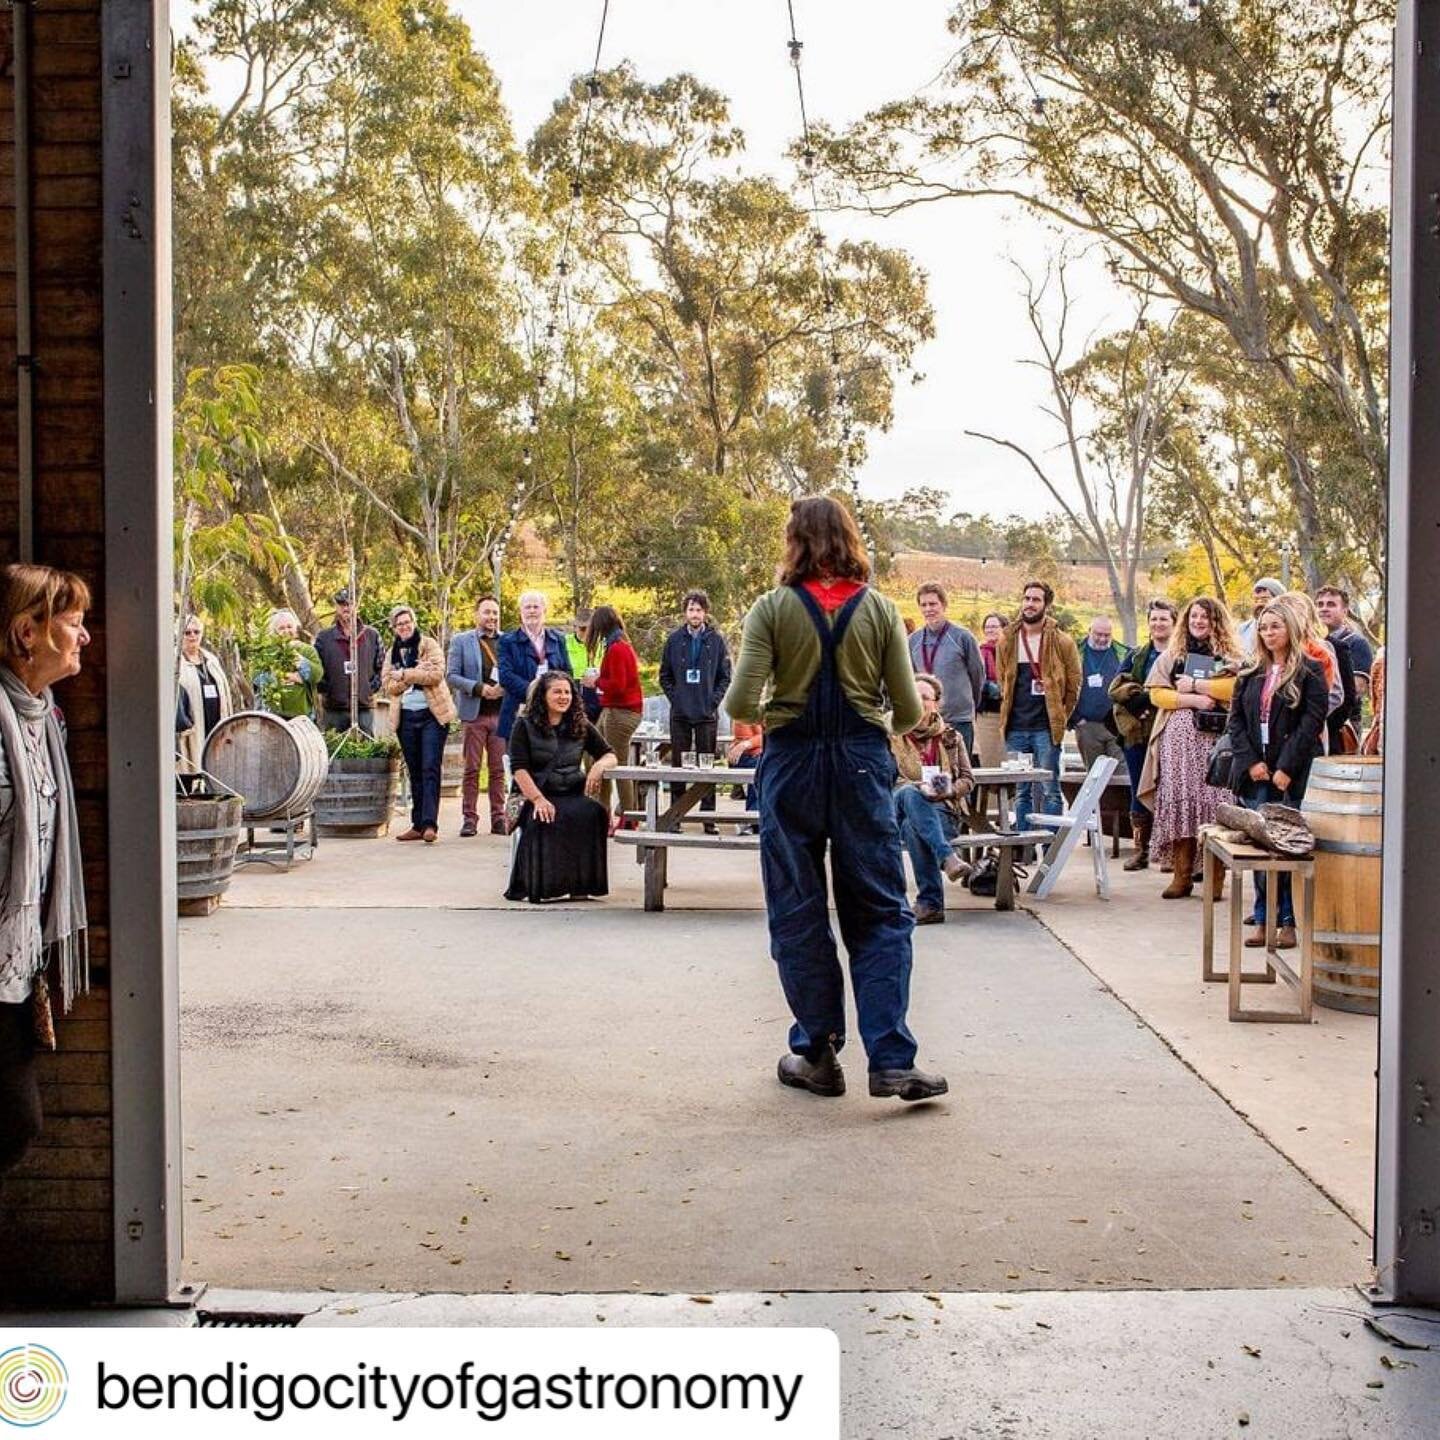 Privileged to be a part of this event - conversations &amp; connections especially to Country 💚 and to have Bunjil circling above during this whole event 💚 @bendigocityofgastronomy 
・・・
Djakitj Larr: towards a communal food of place

Recently, an a